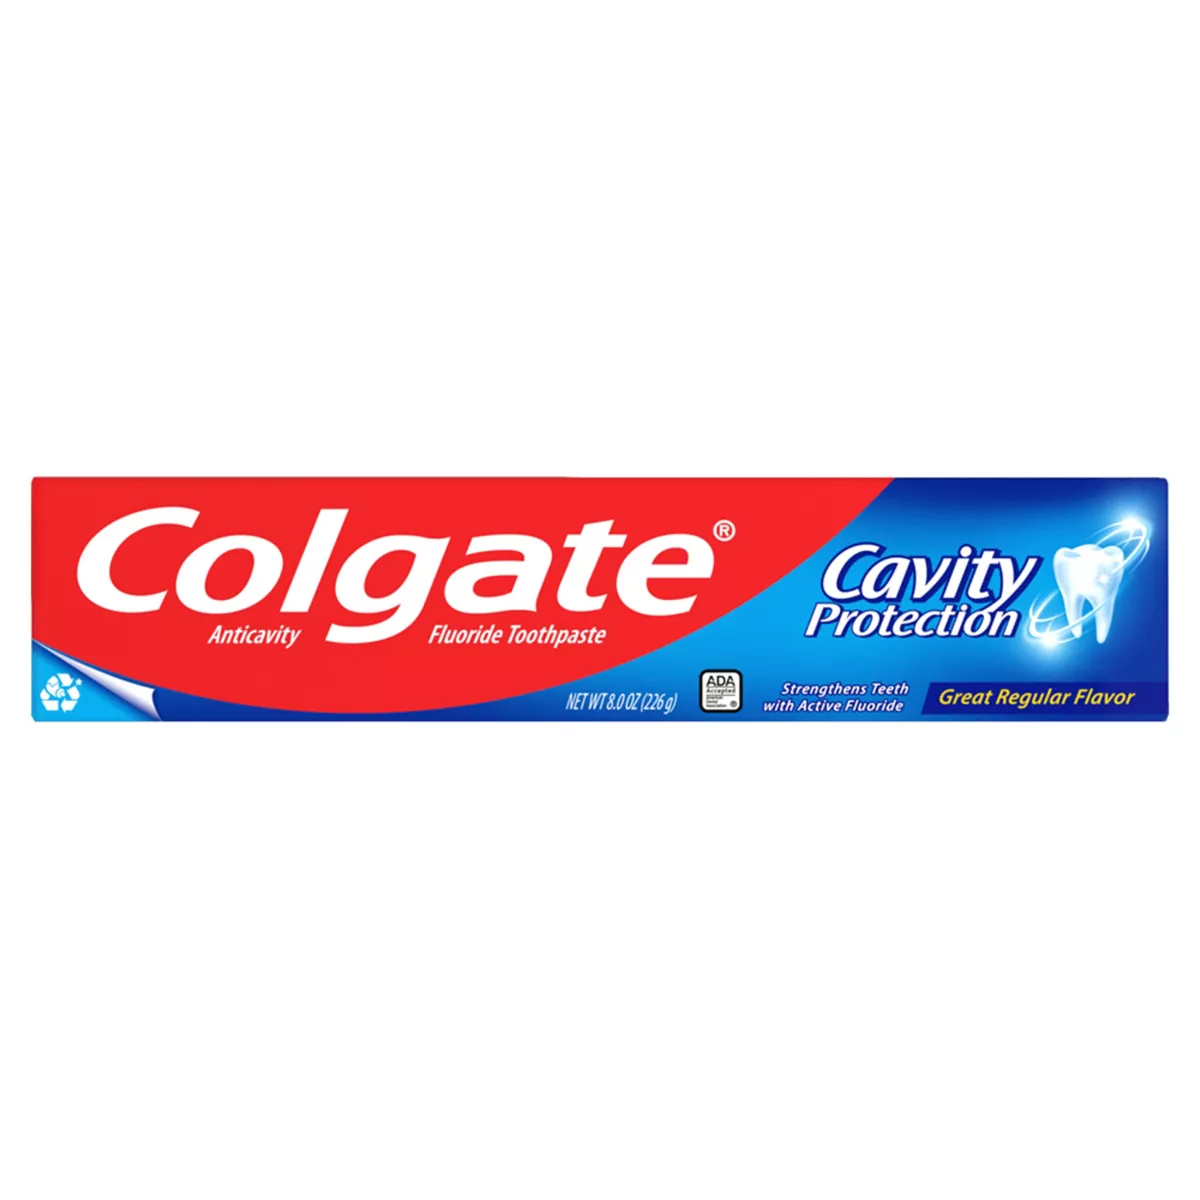 Colgate Triple Action Toothpaste (226g)